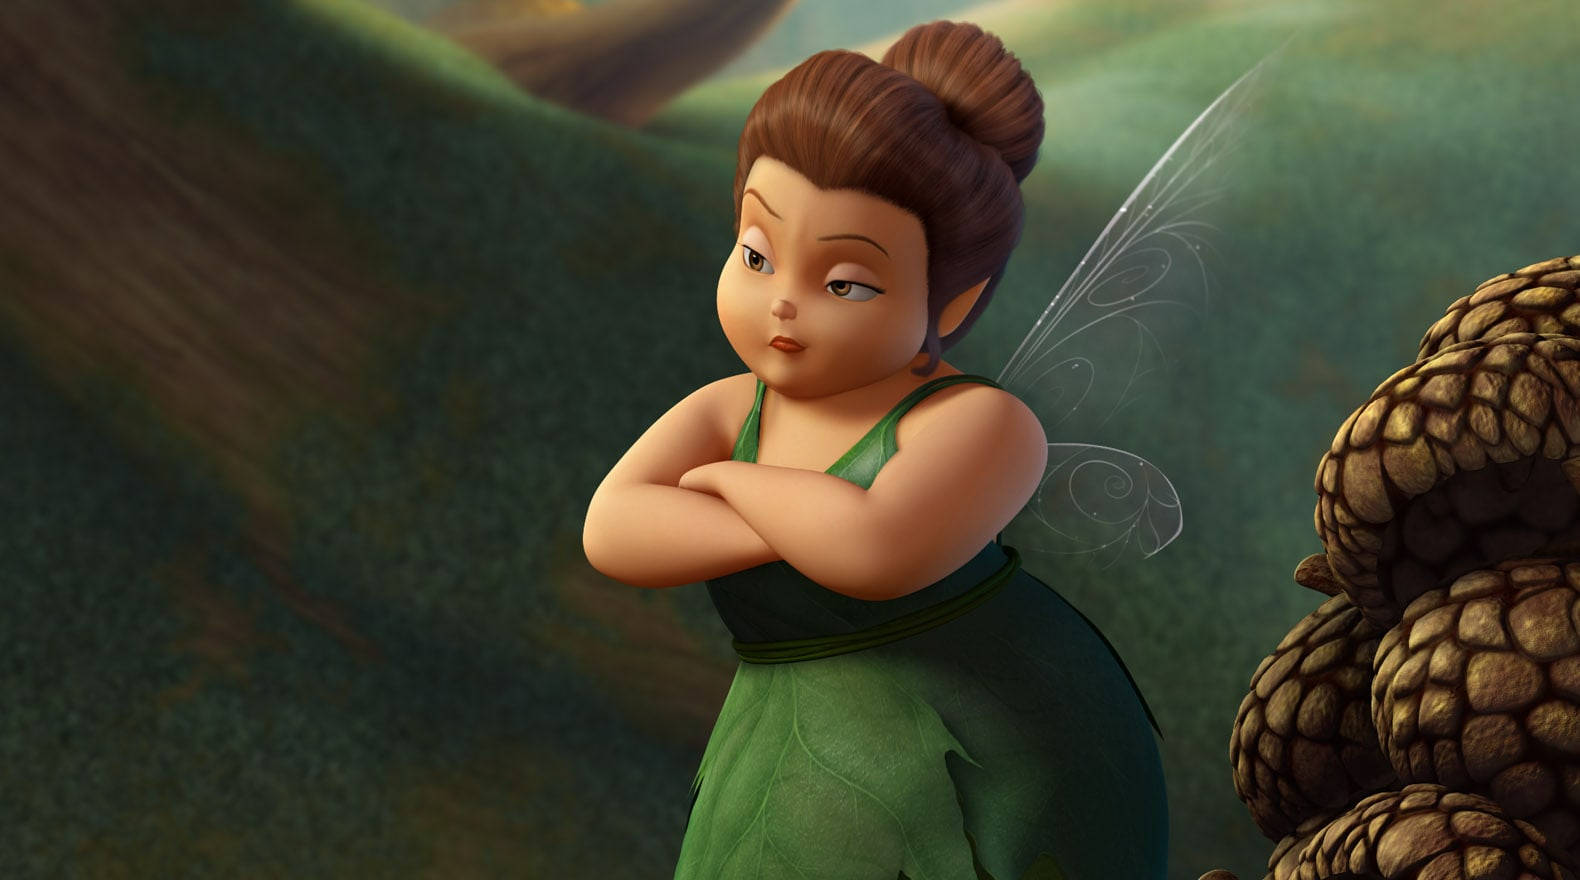 Top 999+ Tinker Bell Wallpapers Full HD, 4K✅Free to Use